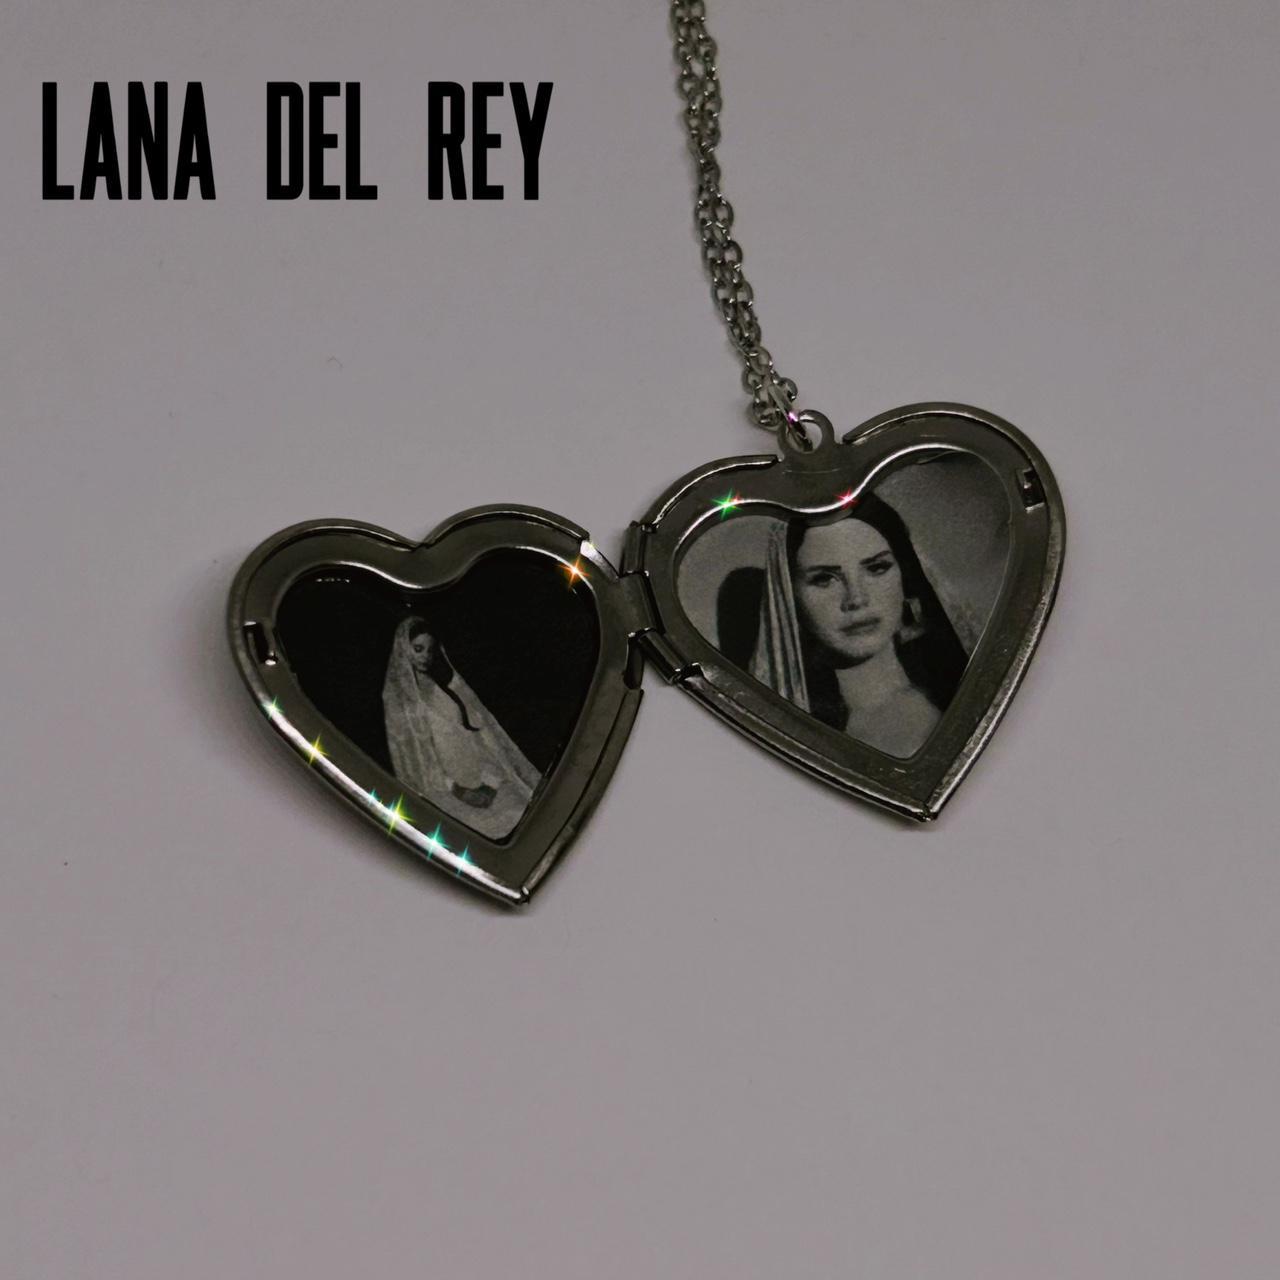 LANA DEL REY Necklace -LDR Style Necklace-Brass-Gold Plated -Dupe Necklace  £30.00 - PicClick UK